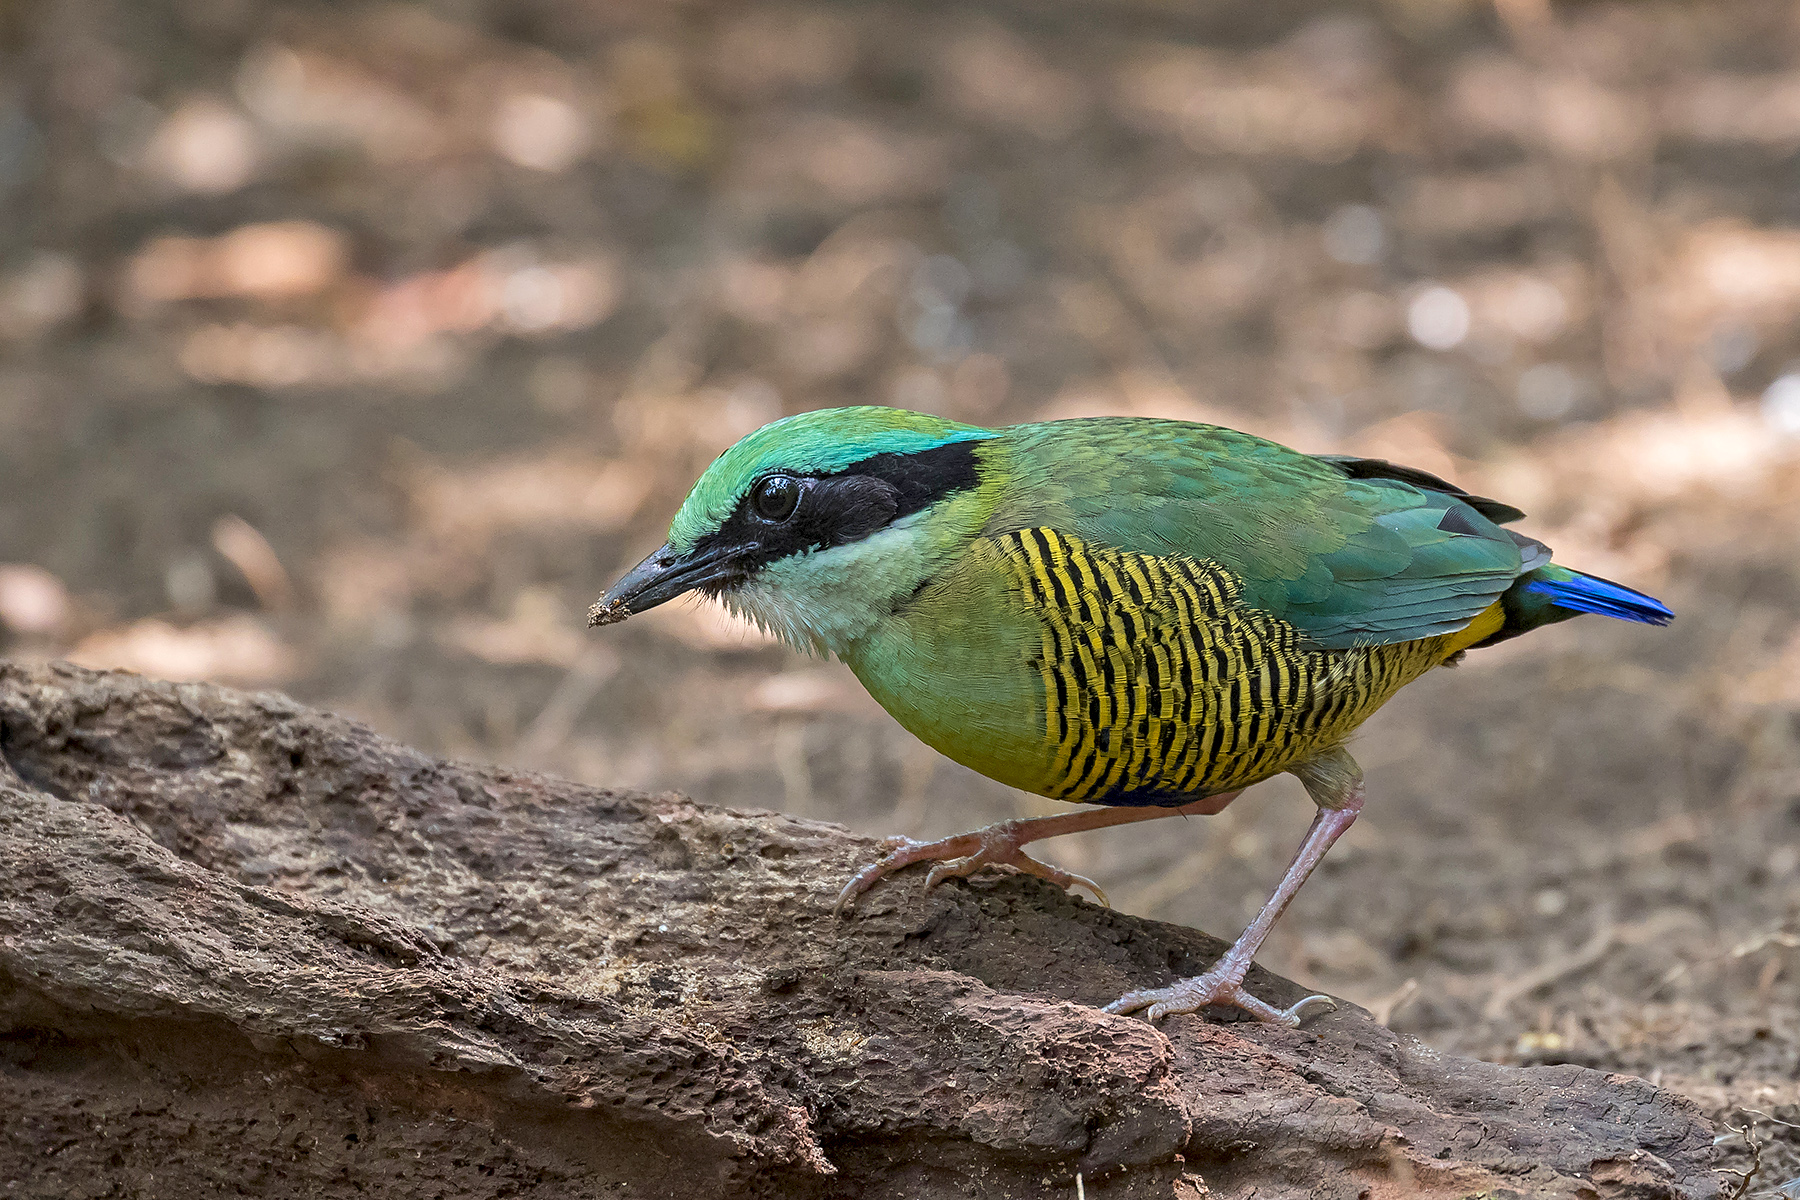 Bar-bellied Pitta on our Vietnam birding tour (image by Pete Morris)